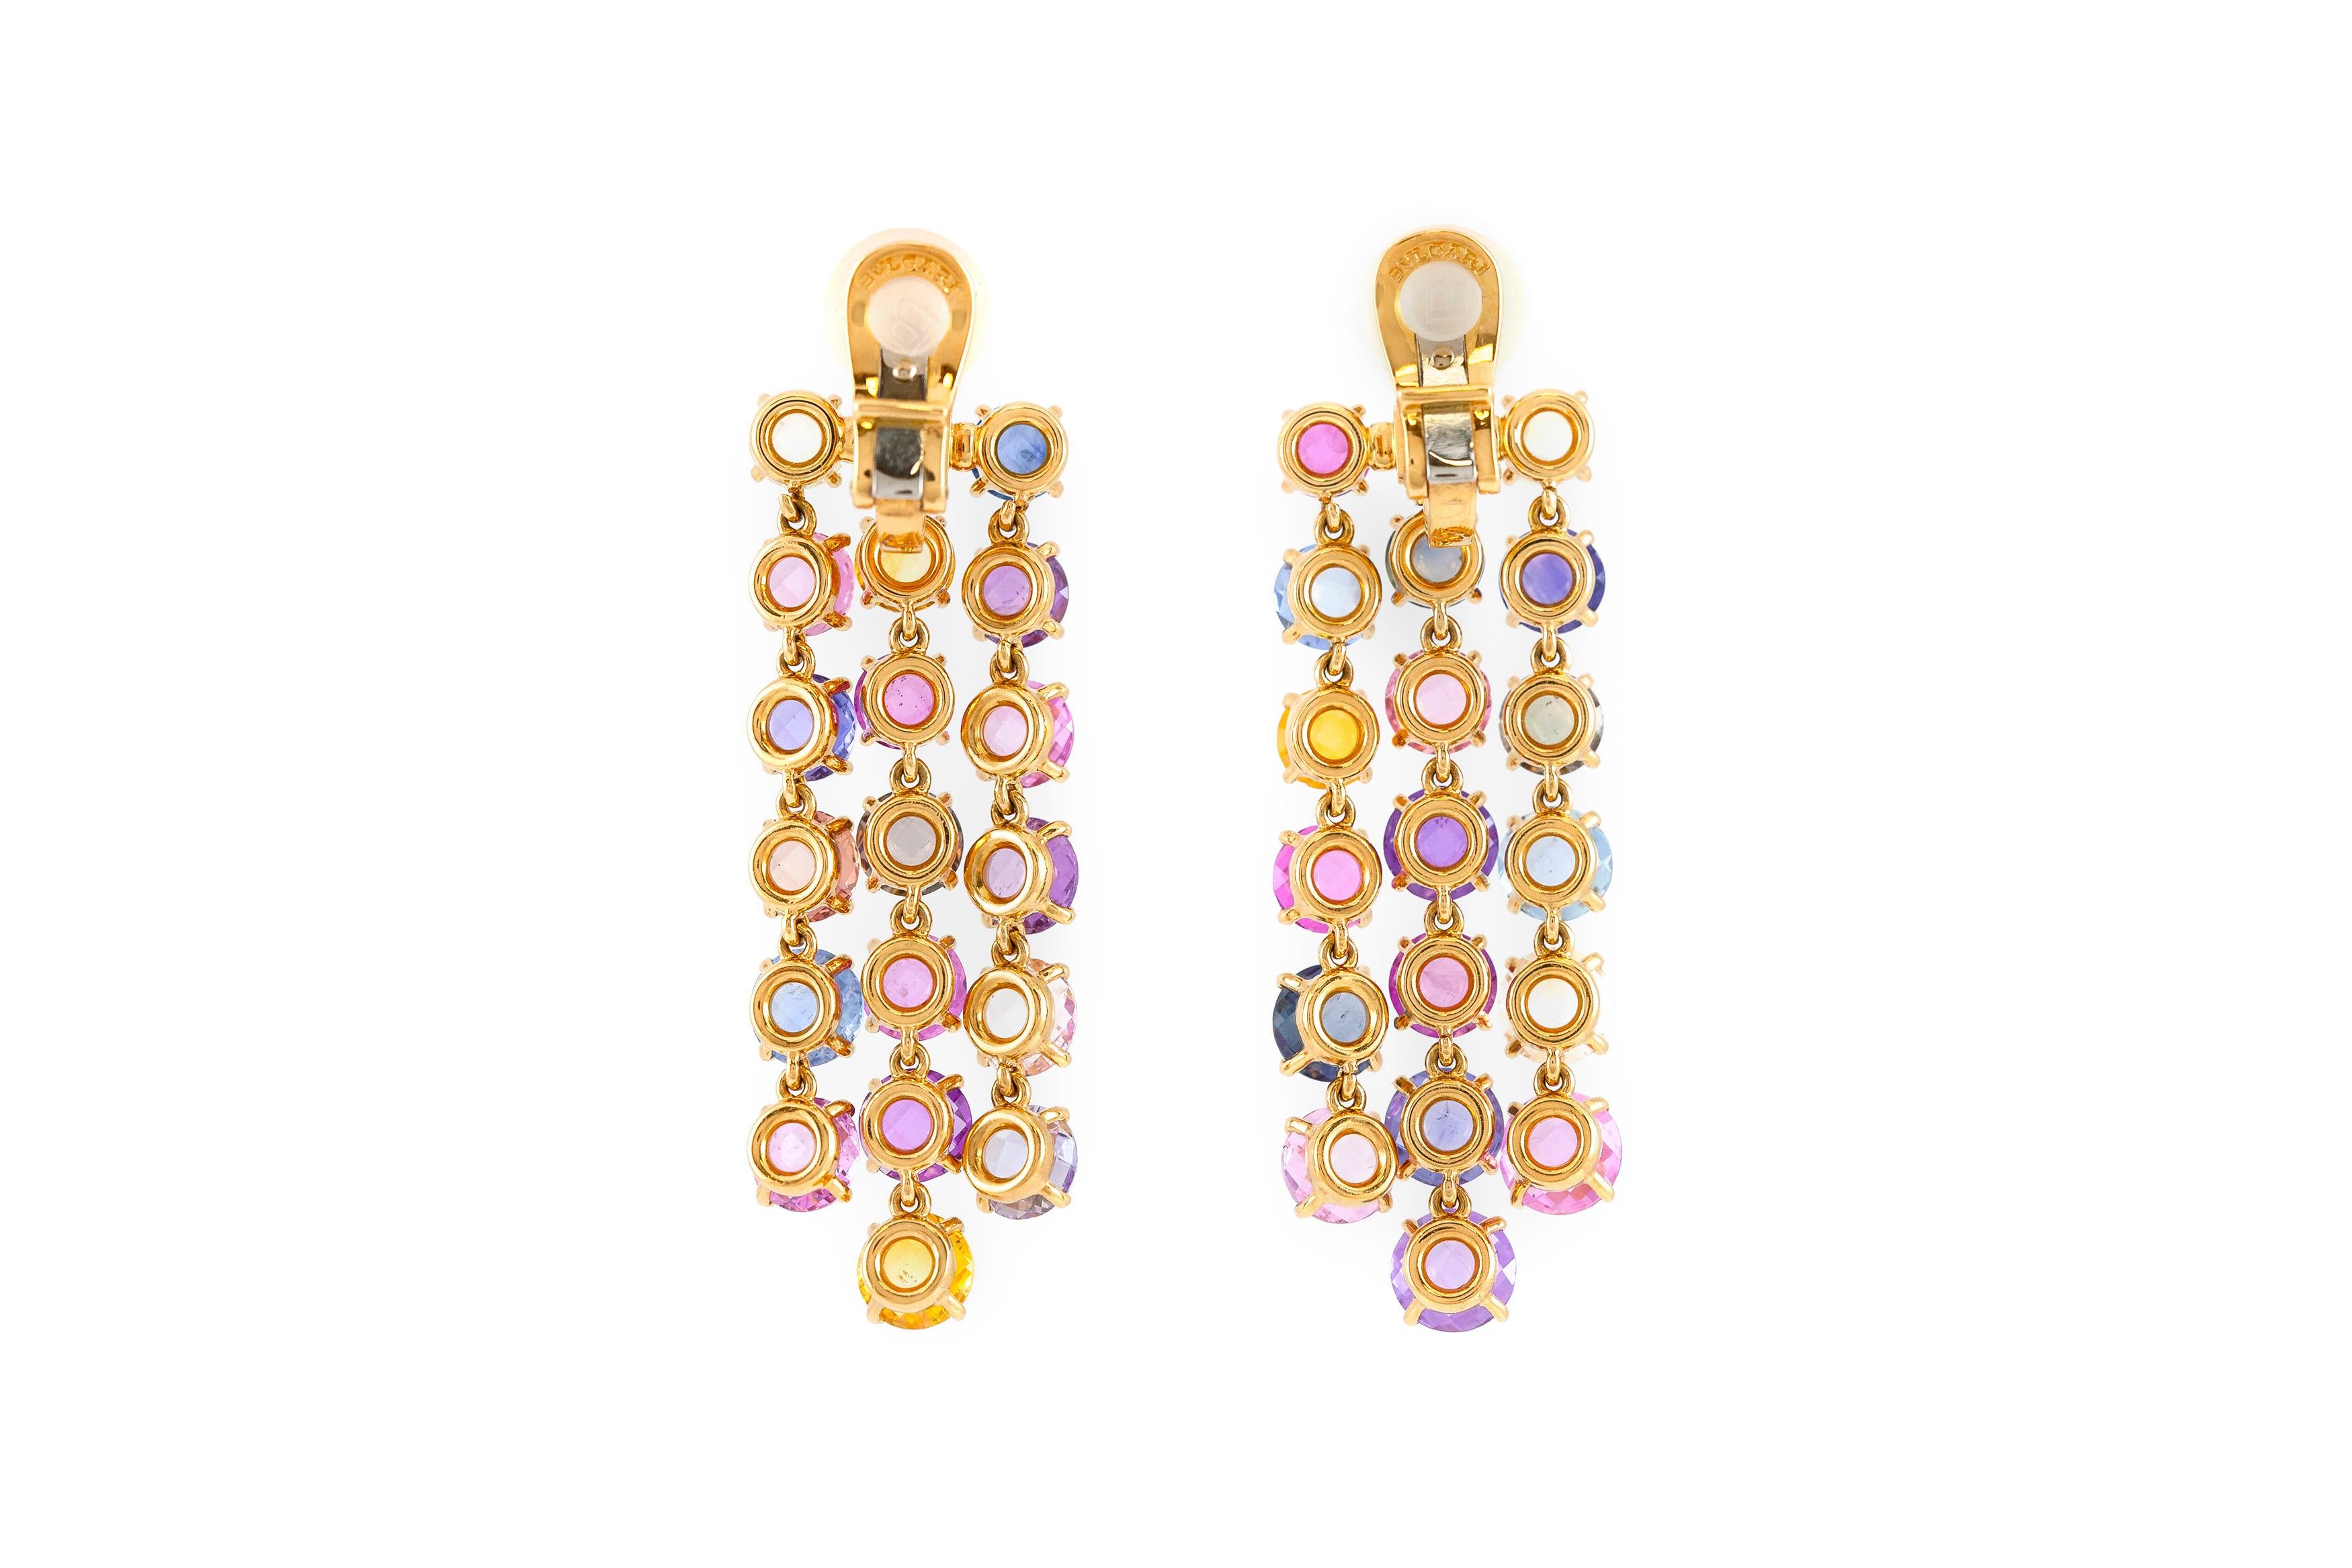 The earrings is finely crafted in 18k yellow gold with three lines of multi color sapphire.

Sign by Bvlgari.